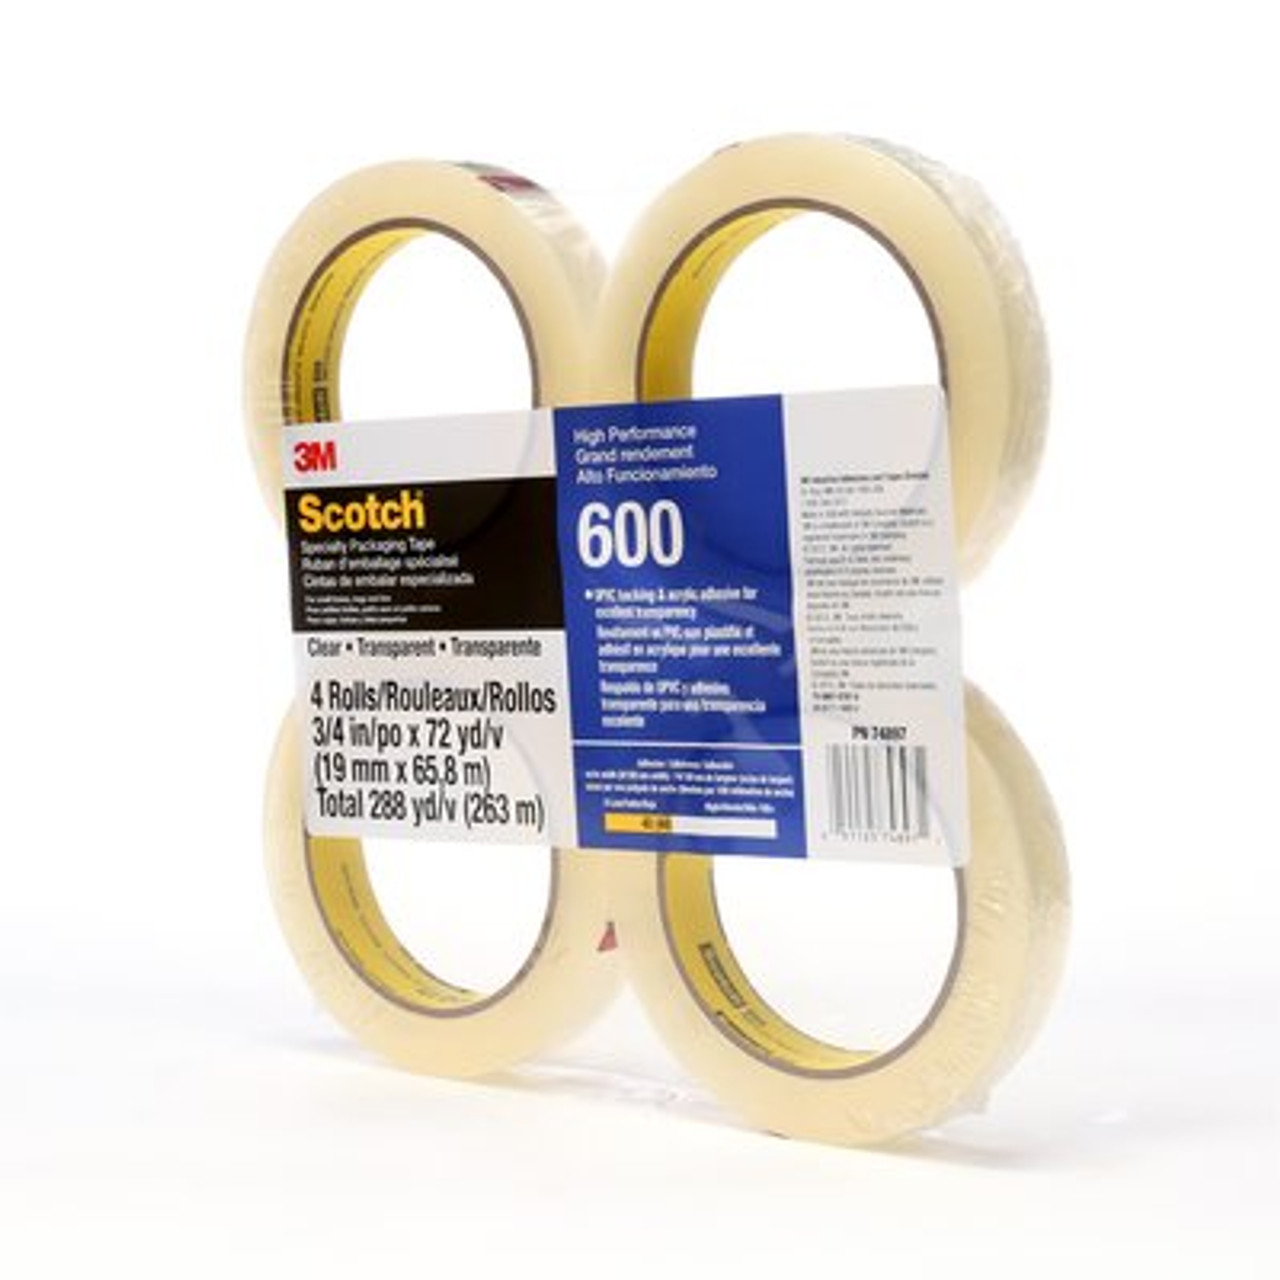 Scotch® Light Duty Packaging Tape 600 Clear High Clarity, 3/4 in x 72 yd, 4 rolls per pack 12 packs per case Conveniently Packaged